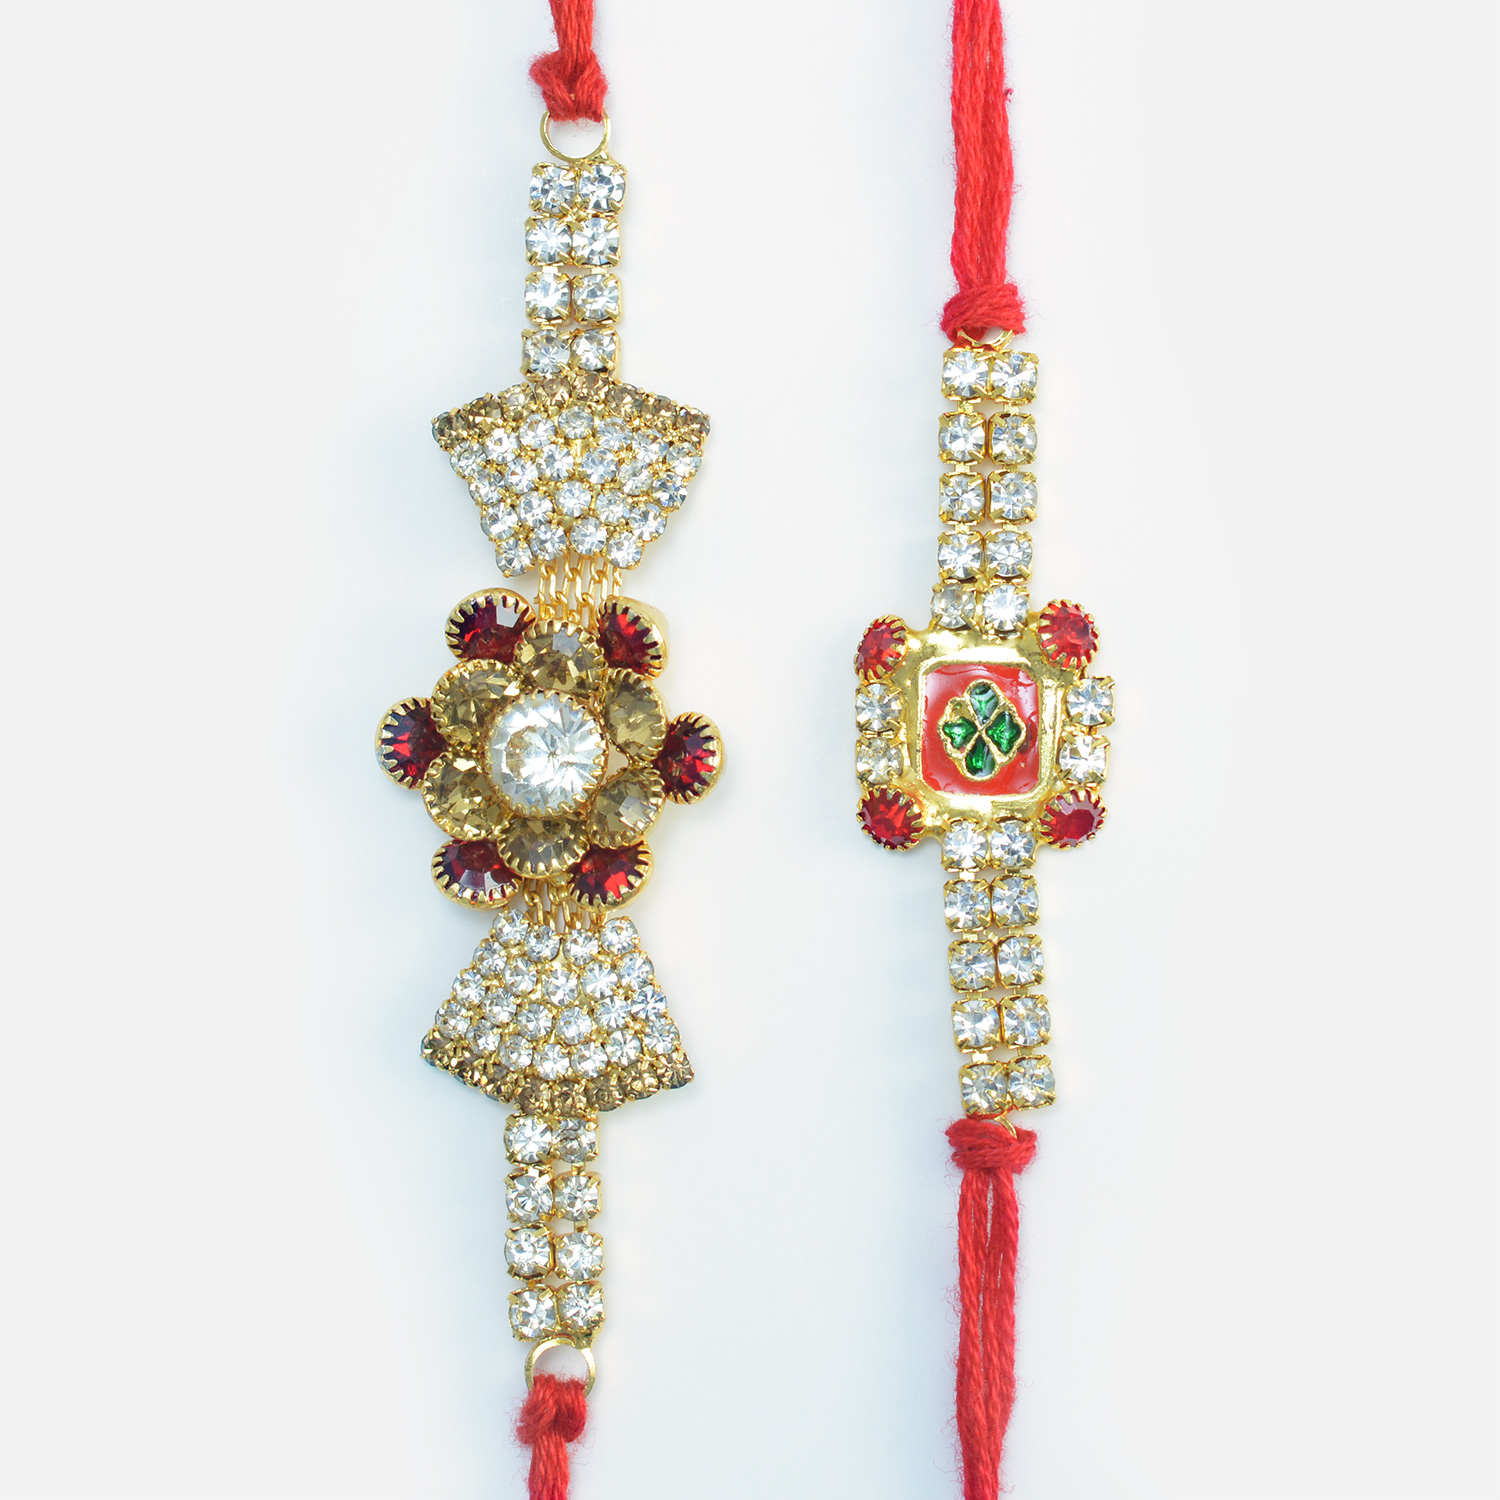 Rich and Heavy Work Design Amazing Looking Two Jewel Rakhis for Brothers